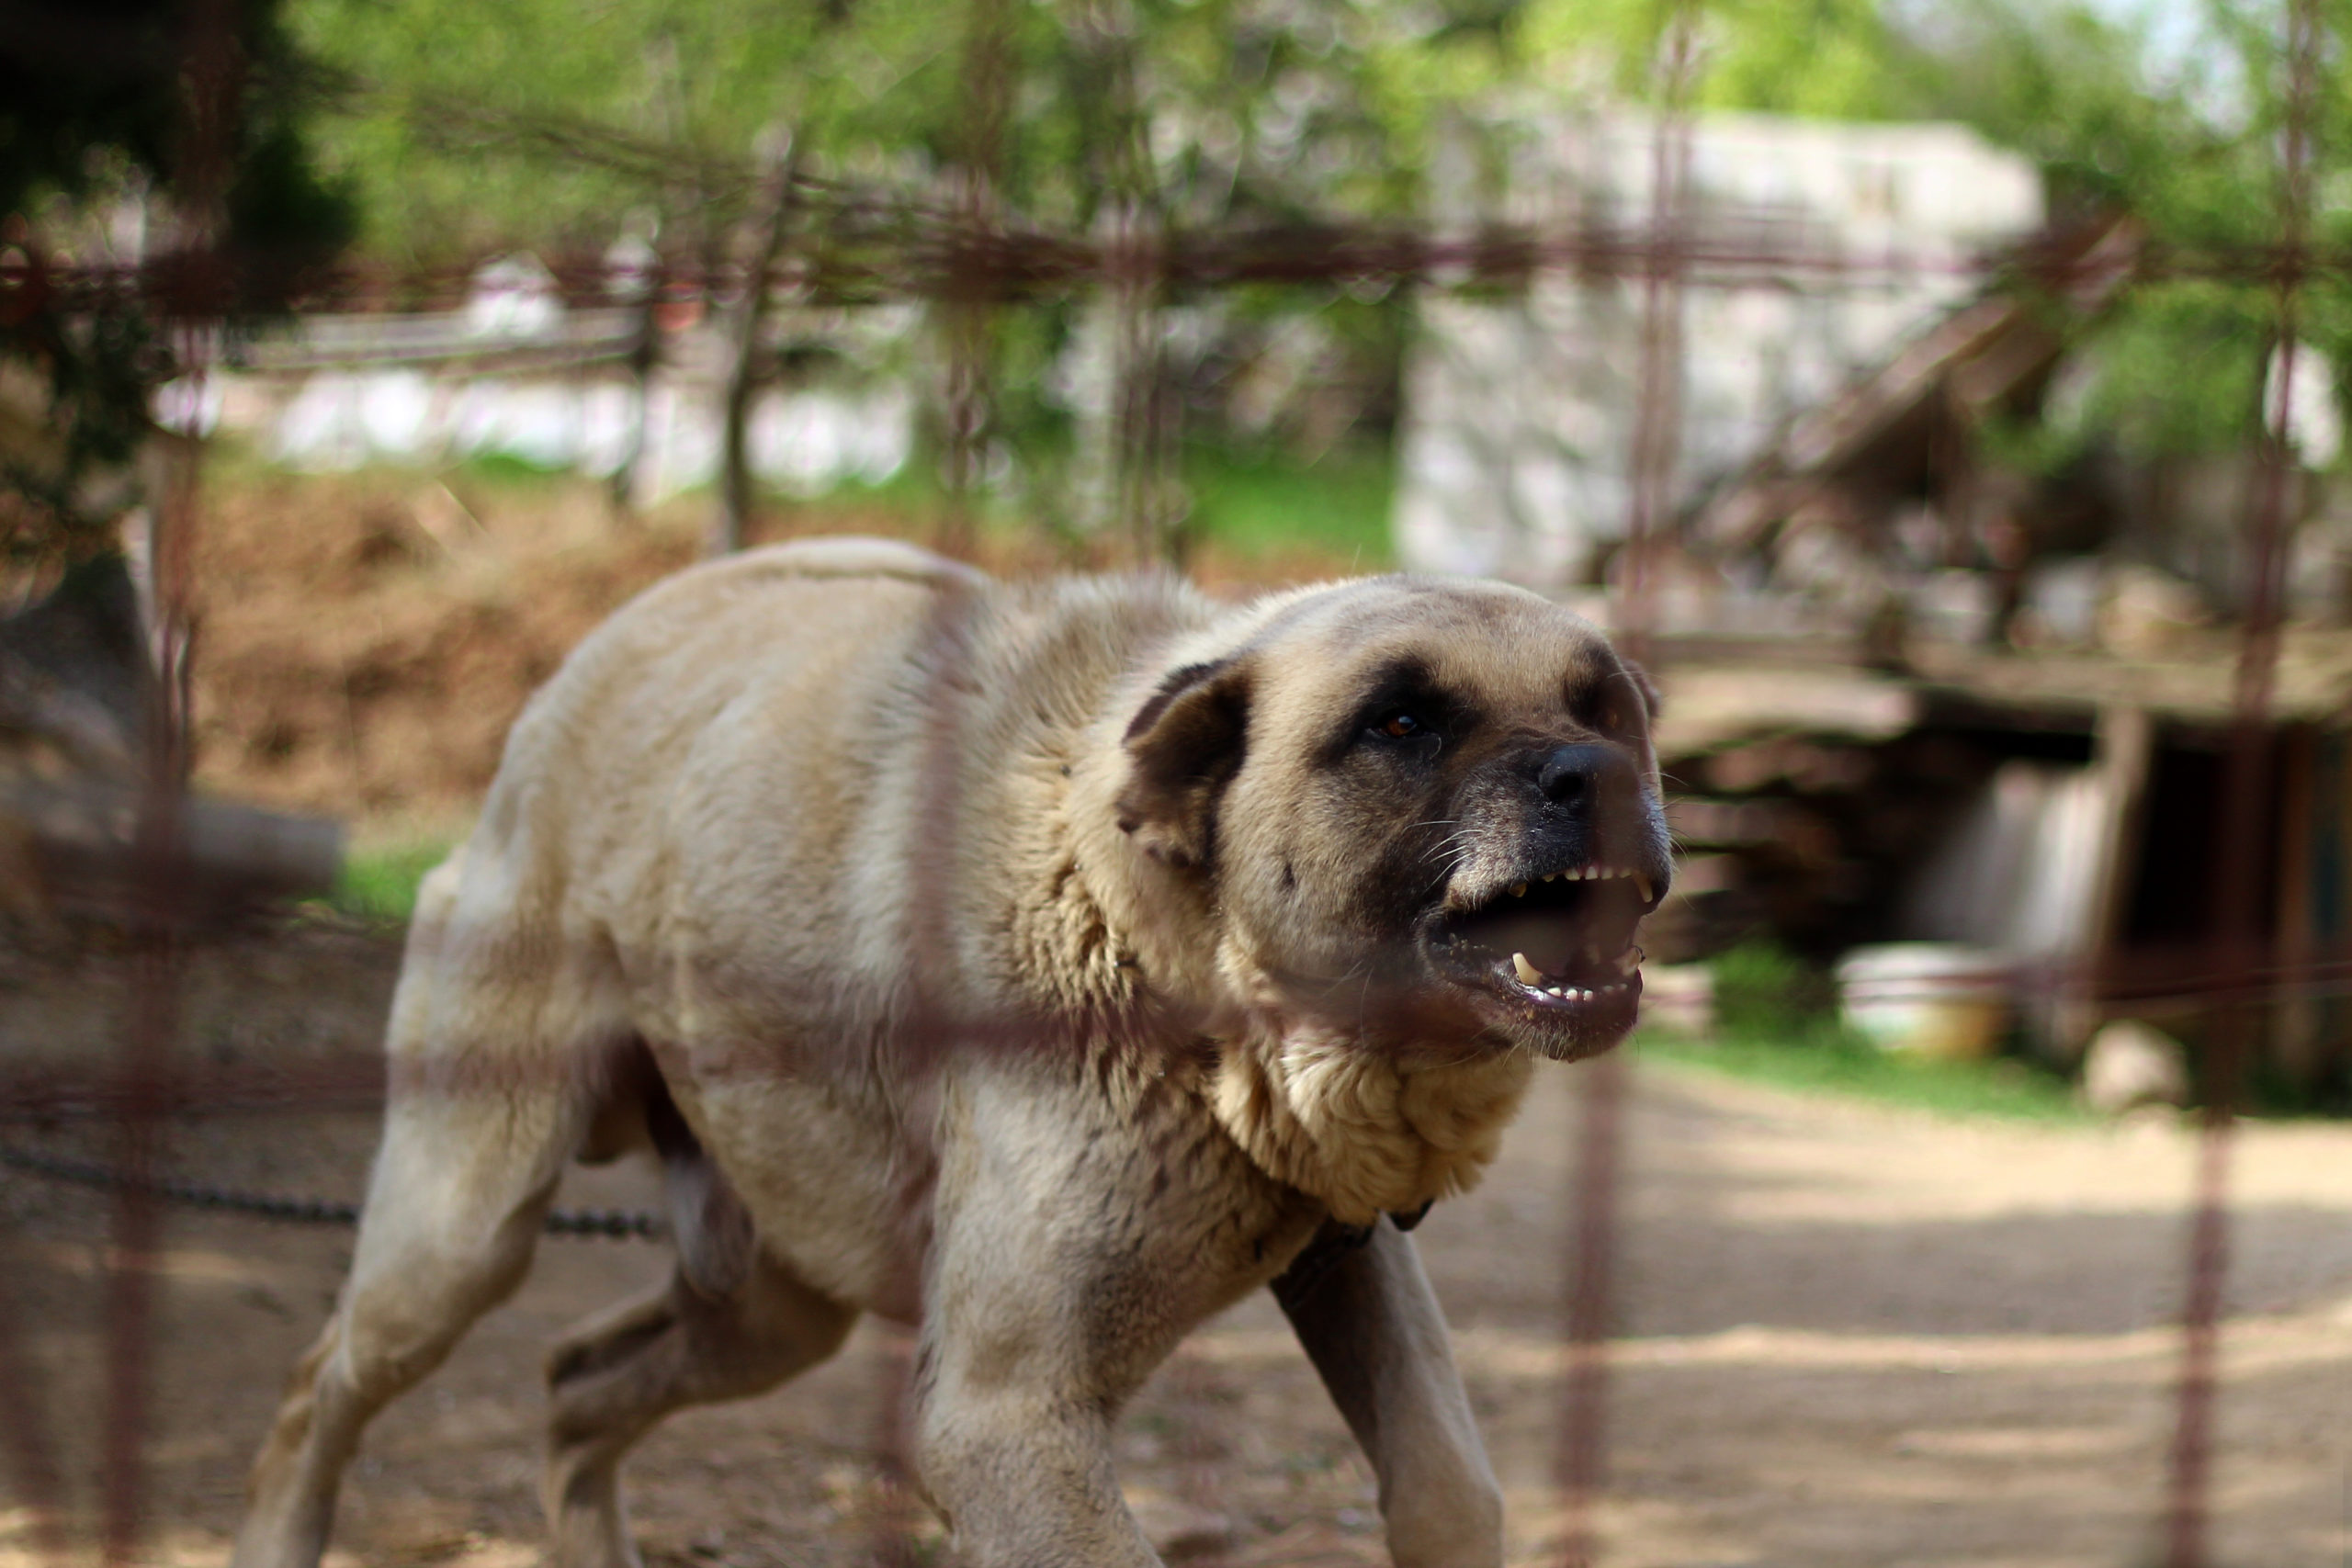 An aggressive Turkish Kangal dog showing teeth to a person.